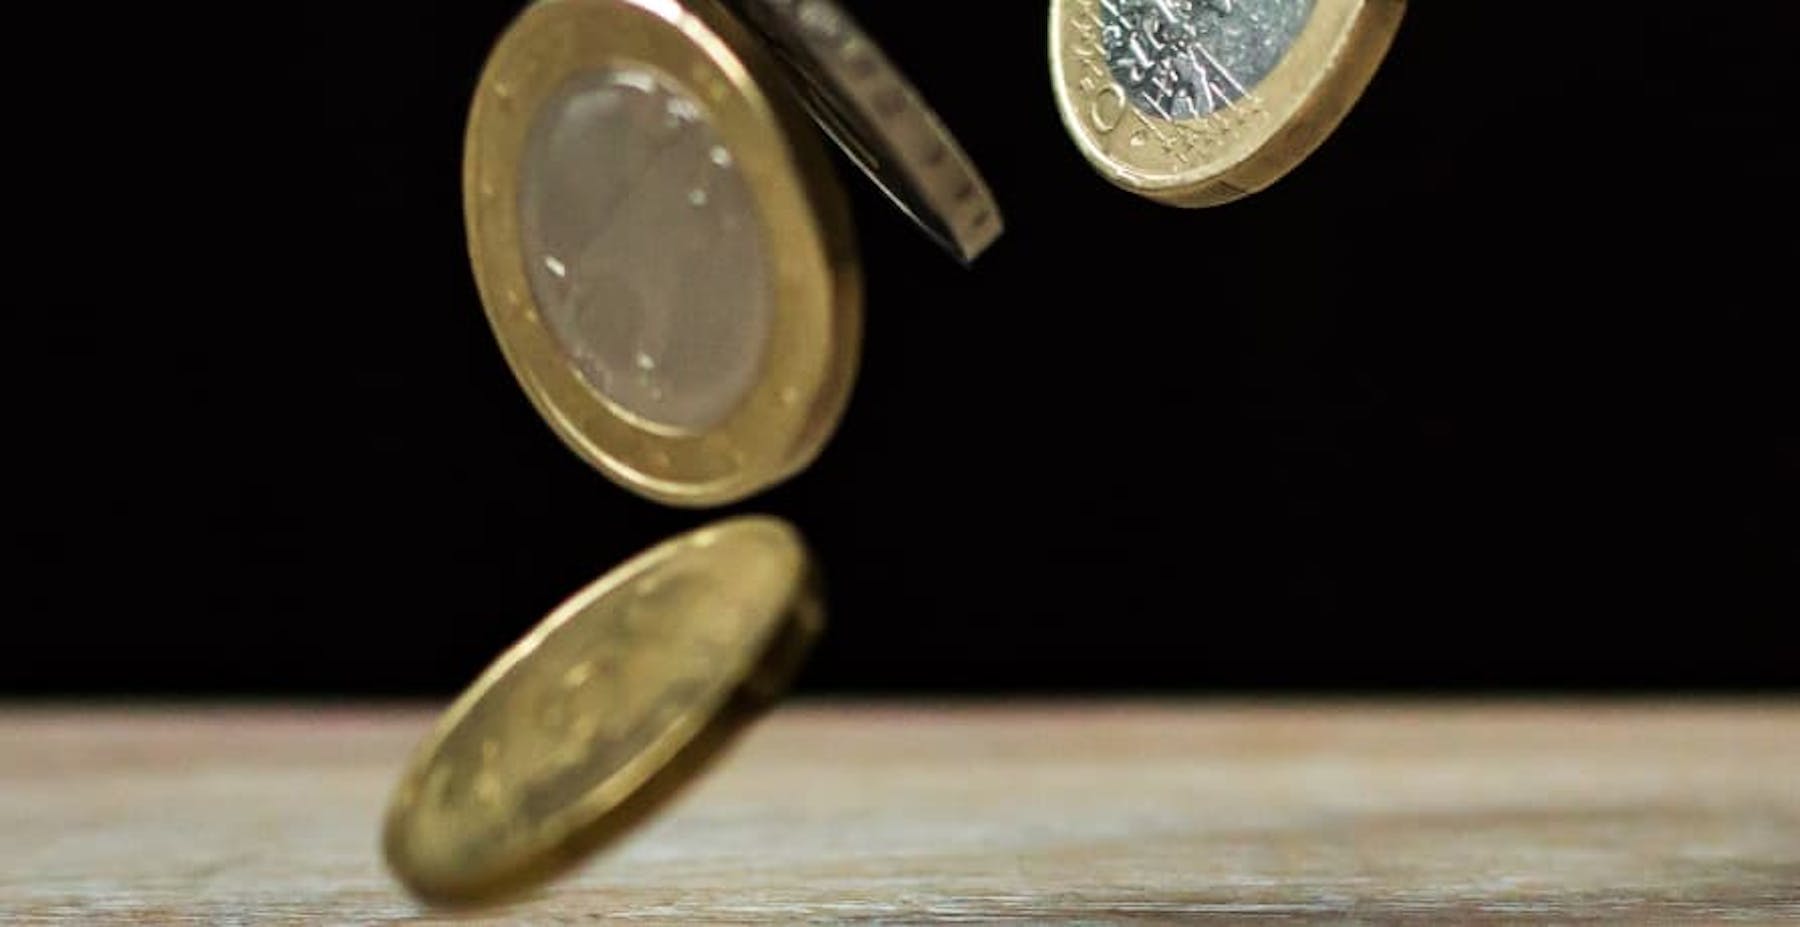 Euro coins falling on the table